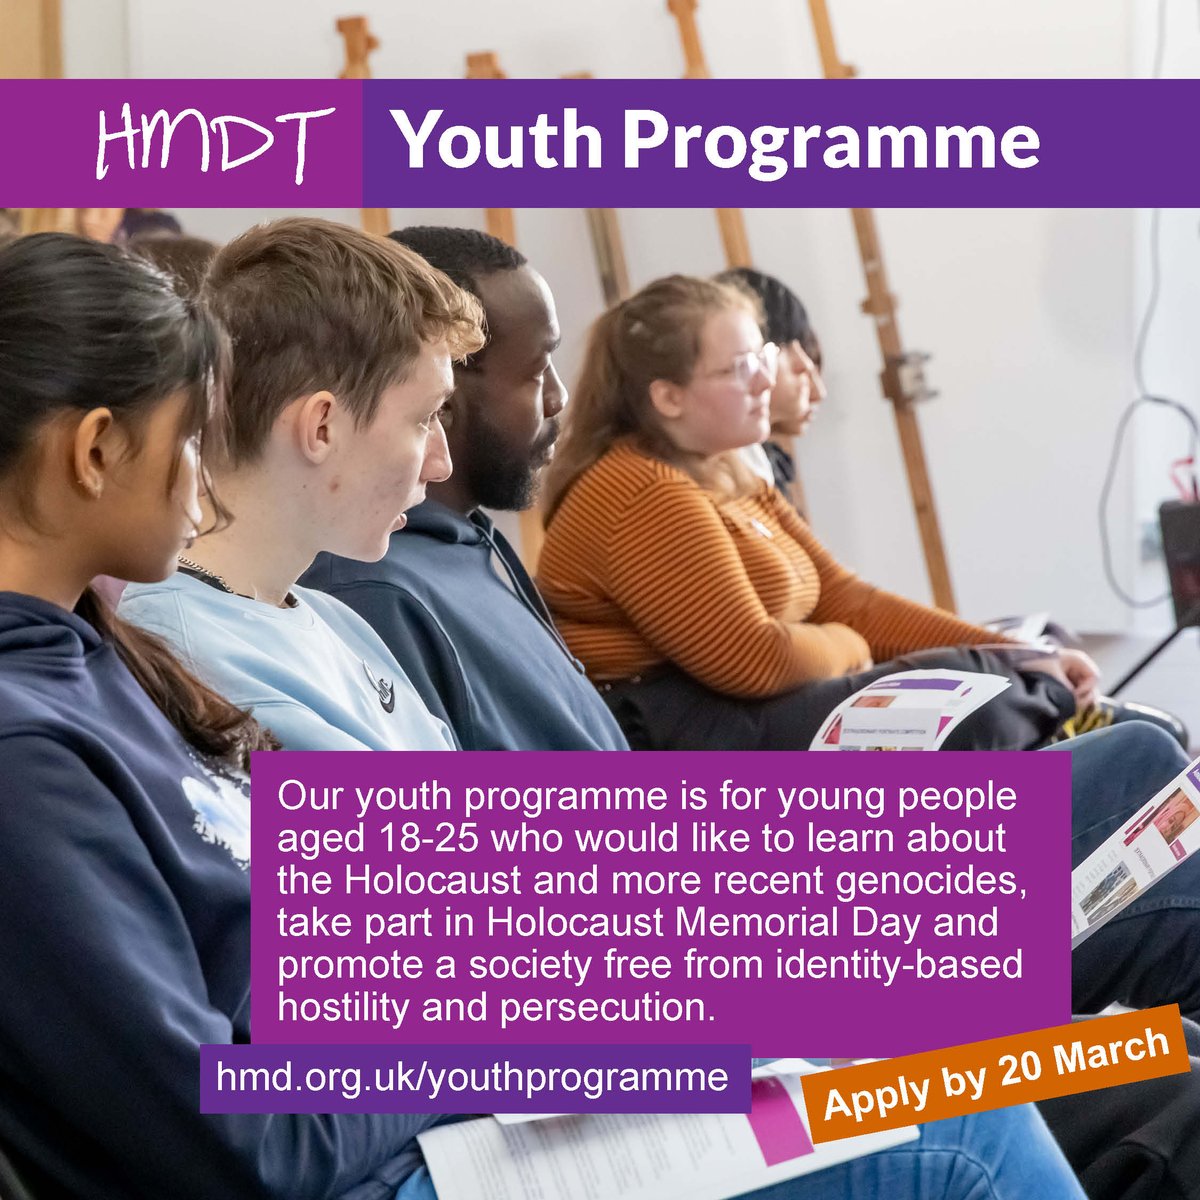 Our new #youth programme launches today! The year-long programme is a great way for young people to learn about the Holocaust and more recent genocides, take part in #HolocaustMemorialDay and promote a society free from identity-based hostility. Apply here:…